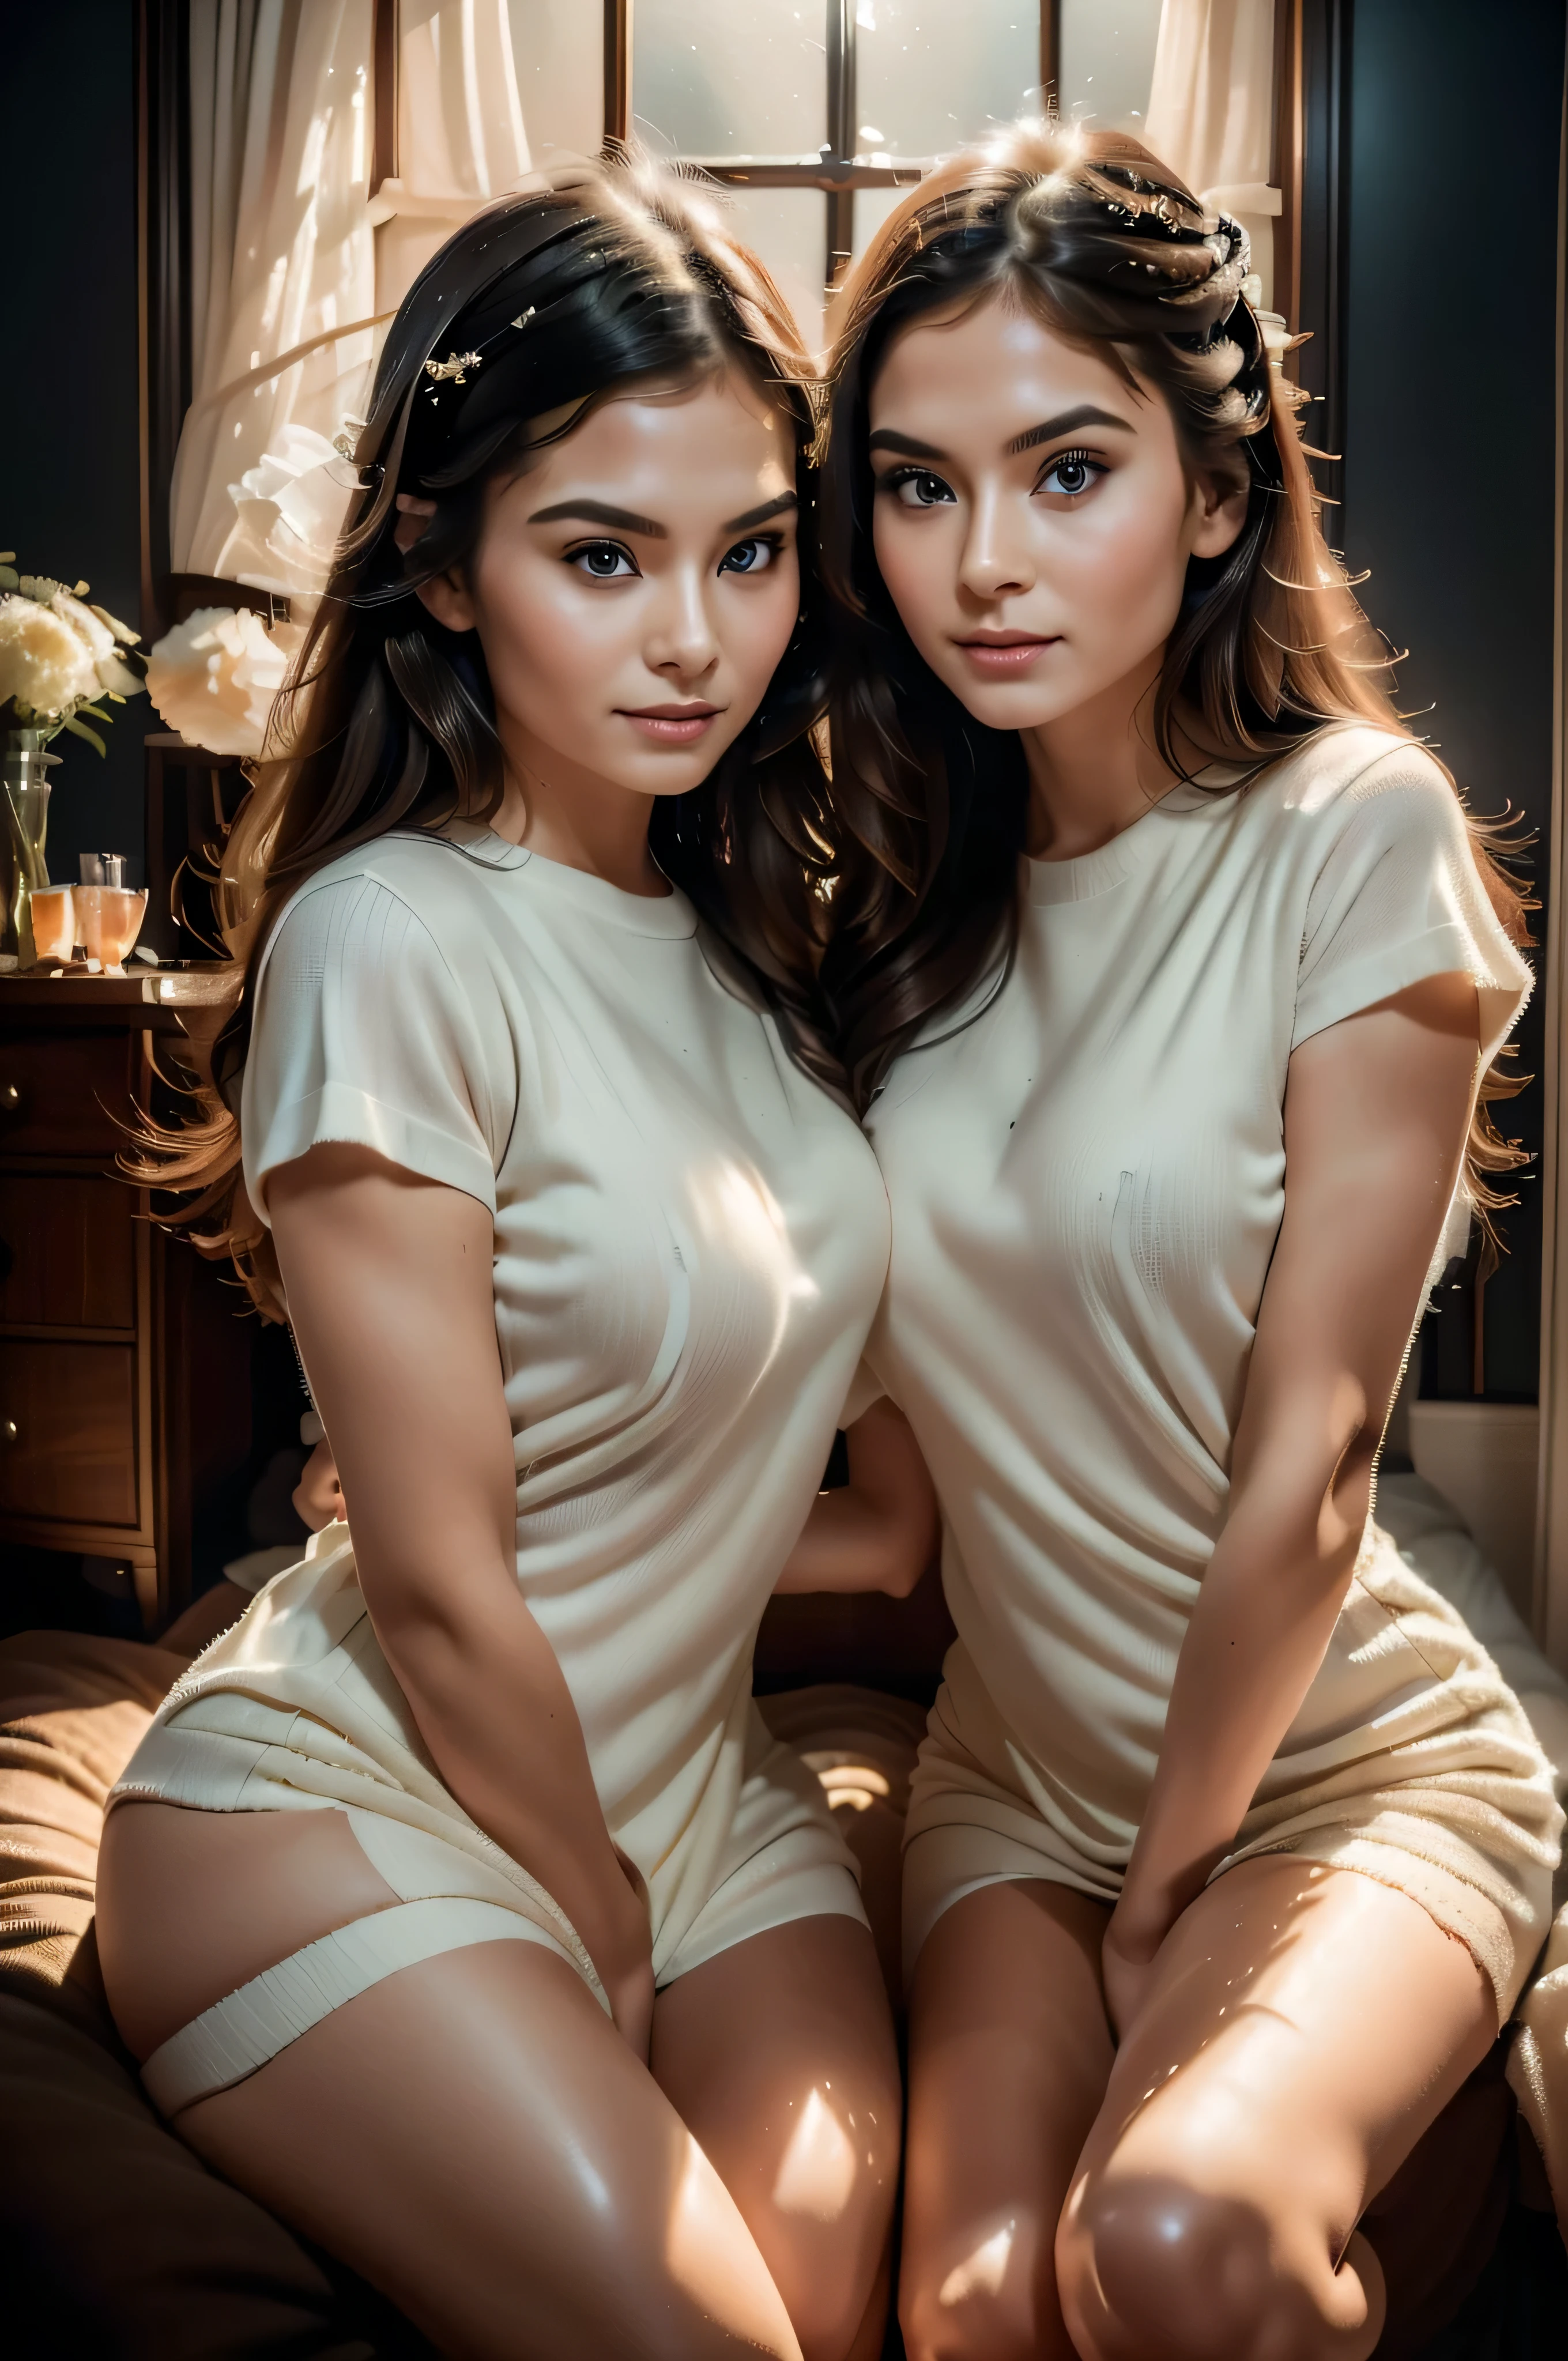 (best quality,4k,8k,highres,masterpiece:1.2),ultra-detailed,(realistic,photorealistic,photo-realistic:1.37),charming,beautiful,celebrity,(latina twins),portrait,charisma,detailed facial features,gorgeous blue eyes,endearing smile,long luscious lashes,perfectly arched brows,twin sisters,striking resemblance,flawless complexion,soft and radiant skin,beautifully styled hair,fashionable attire,elegant dresses,dynamic poses,sisterly bond,artistic illustration,stunning,heavenly light,atmospheric background,subtle and enchanting colors,classic black and white,stylish and sophisticated style,celebrity glamour,vintage vibes,emotional connection,melancholic atmosphere,serene and peaceful setting,ethereal and dreamy aesthetic.